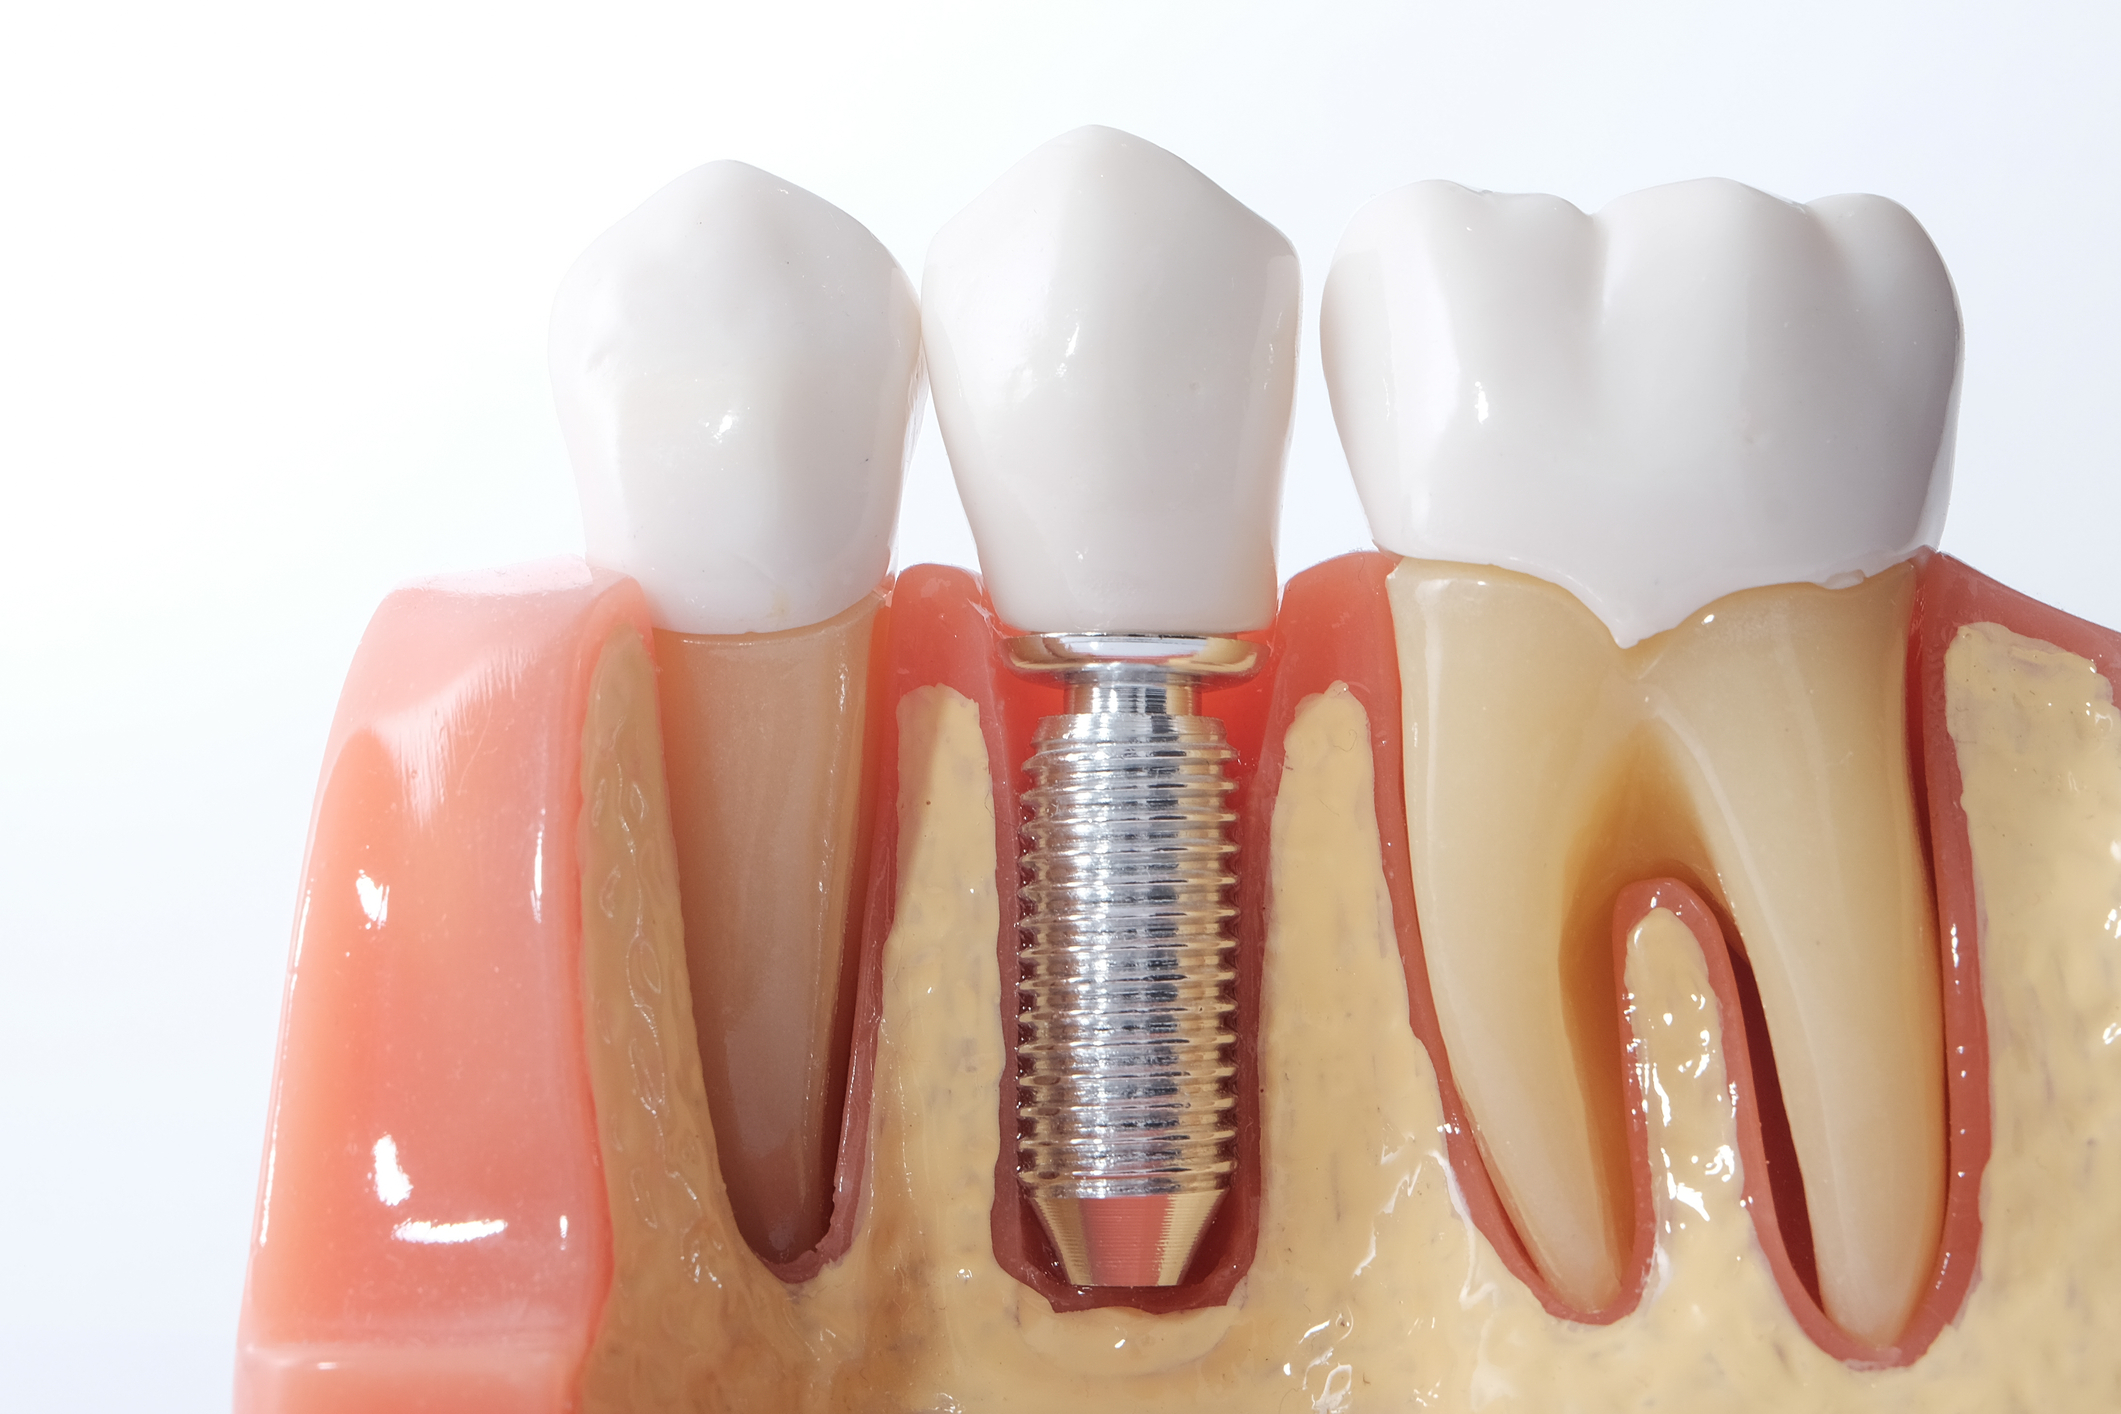 implant surgery or implant therapy model showing a single tooth implant